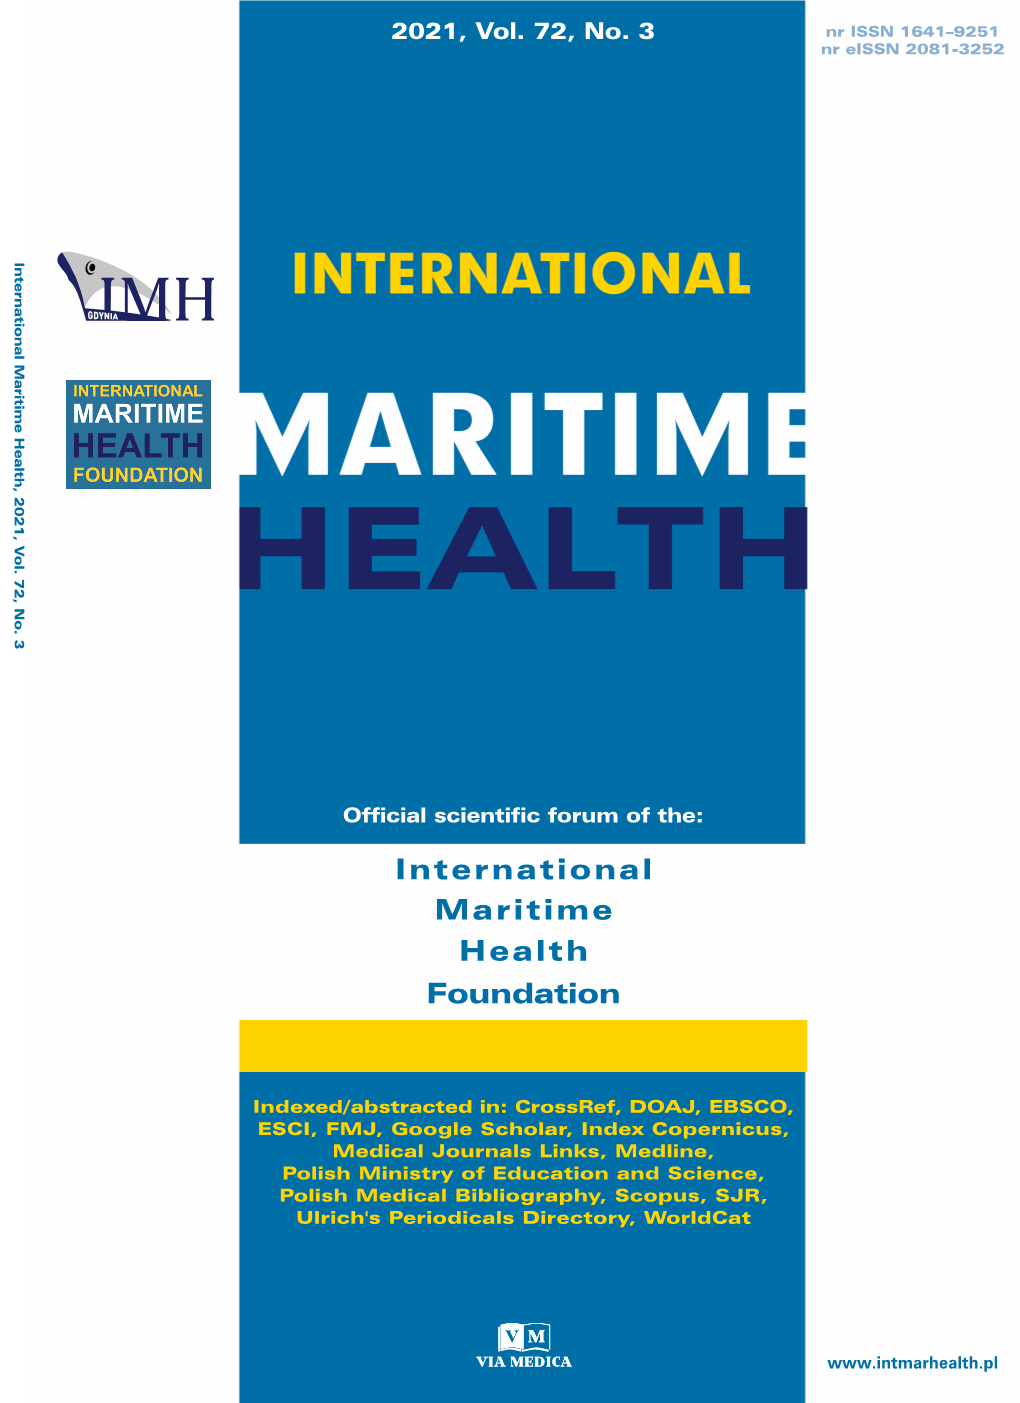 International Maritime Health Foundation Typical Length of Such a Paper Would Be 2000–4000 Words, Not Including Tables, Figures and References